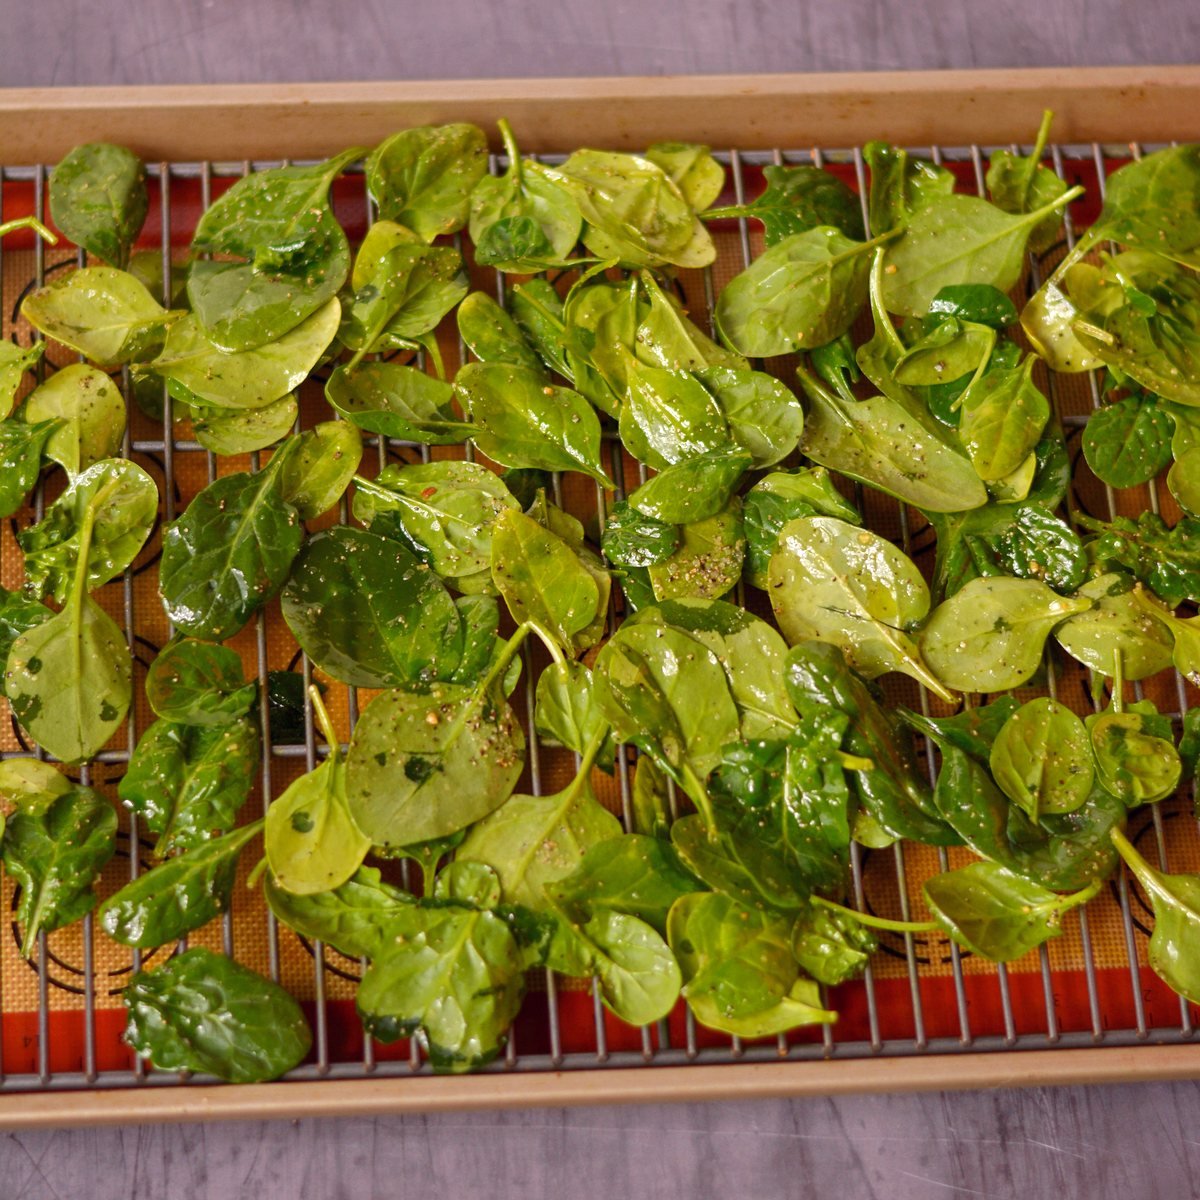 Spinach with oil and seasoning on a wire rack on a baking sheet.